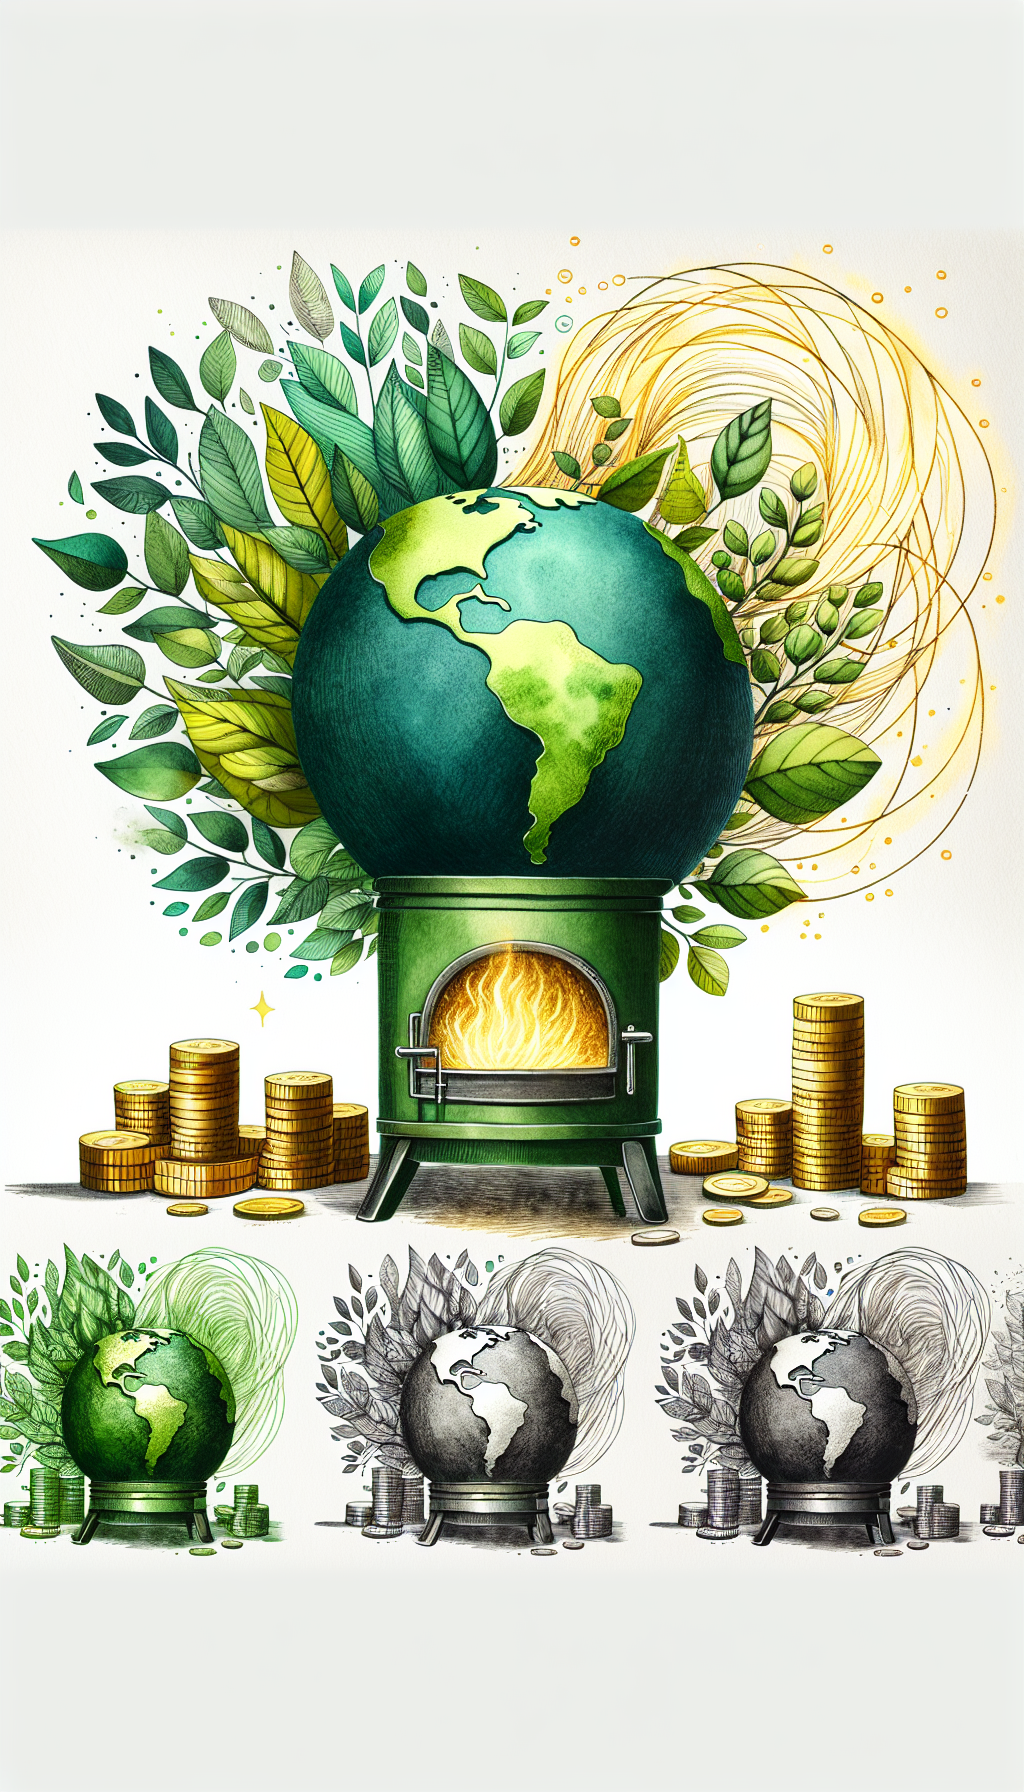 An artful rendering of a verdant globe, its continents textured like lush leaves, rests atop a stylishly abstract, earthen-toned stove. The stove emanates soft, golden spirals—symbols of clean energy—enveloping coins that hint at investment growth. This mix of natural and economic imagery on varied patches of watercolor, line art, and digital graphics visualizes the earth stove's eco-friendly and financial merit.